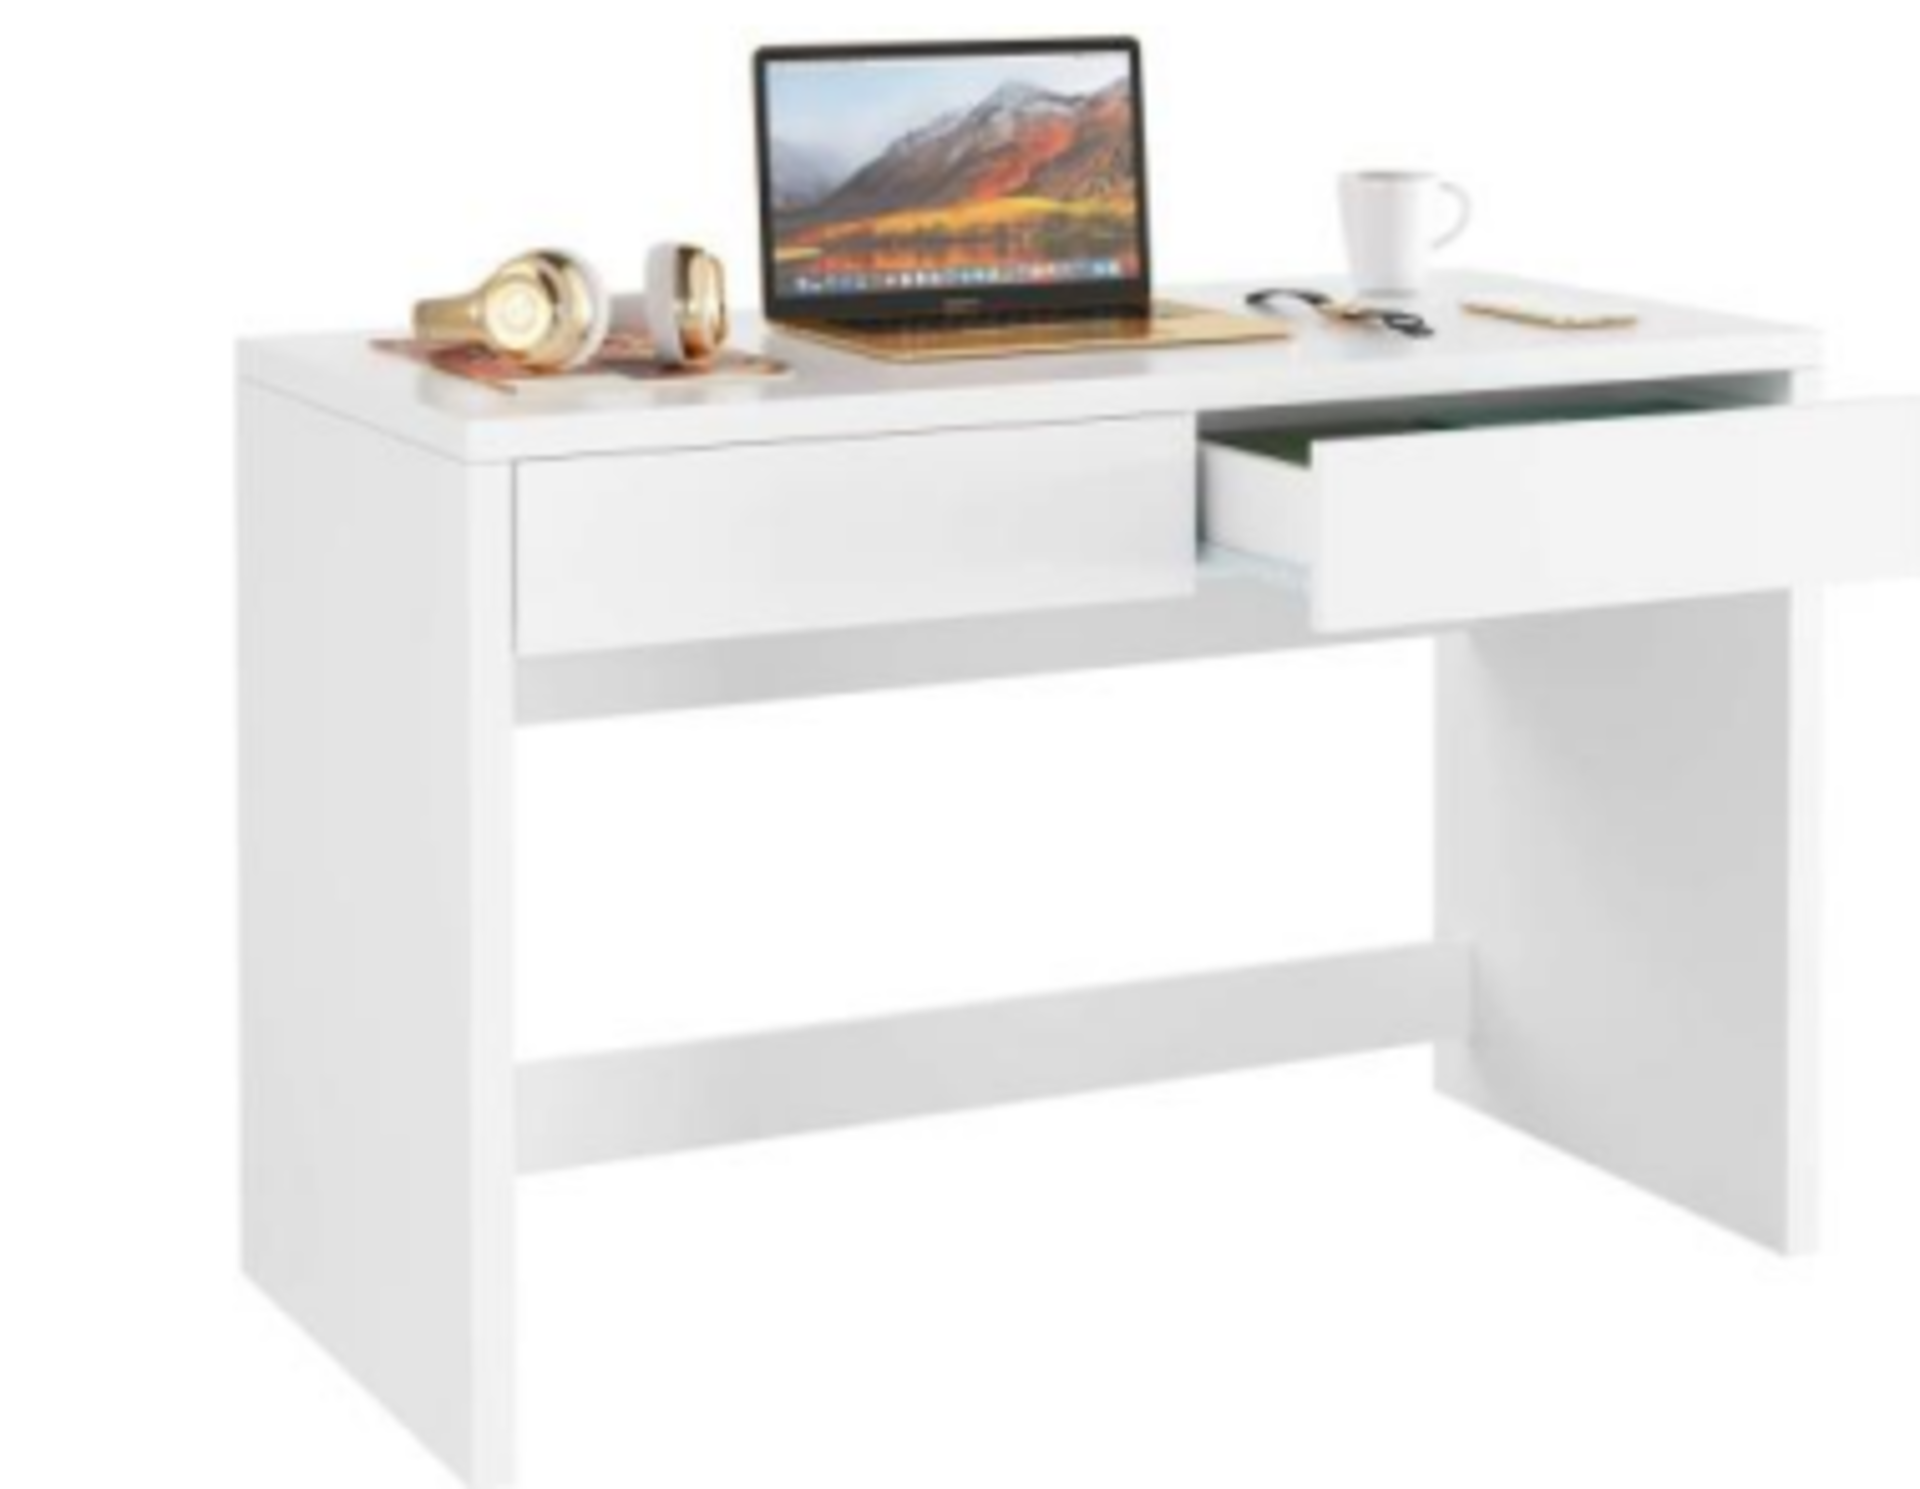 2 X BRAND NEW WHITE DOUBLE DRAWER COMPUTER DESKS RRP £179 (678-1)